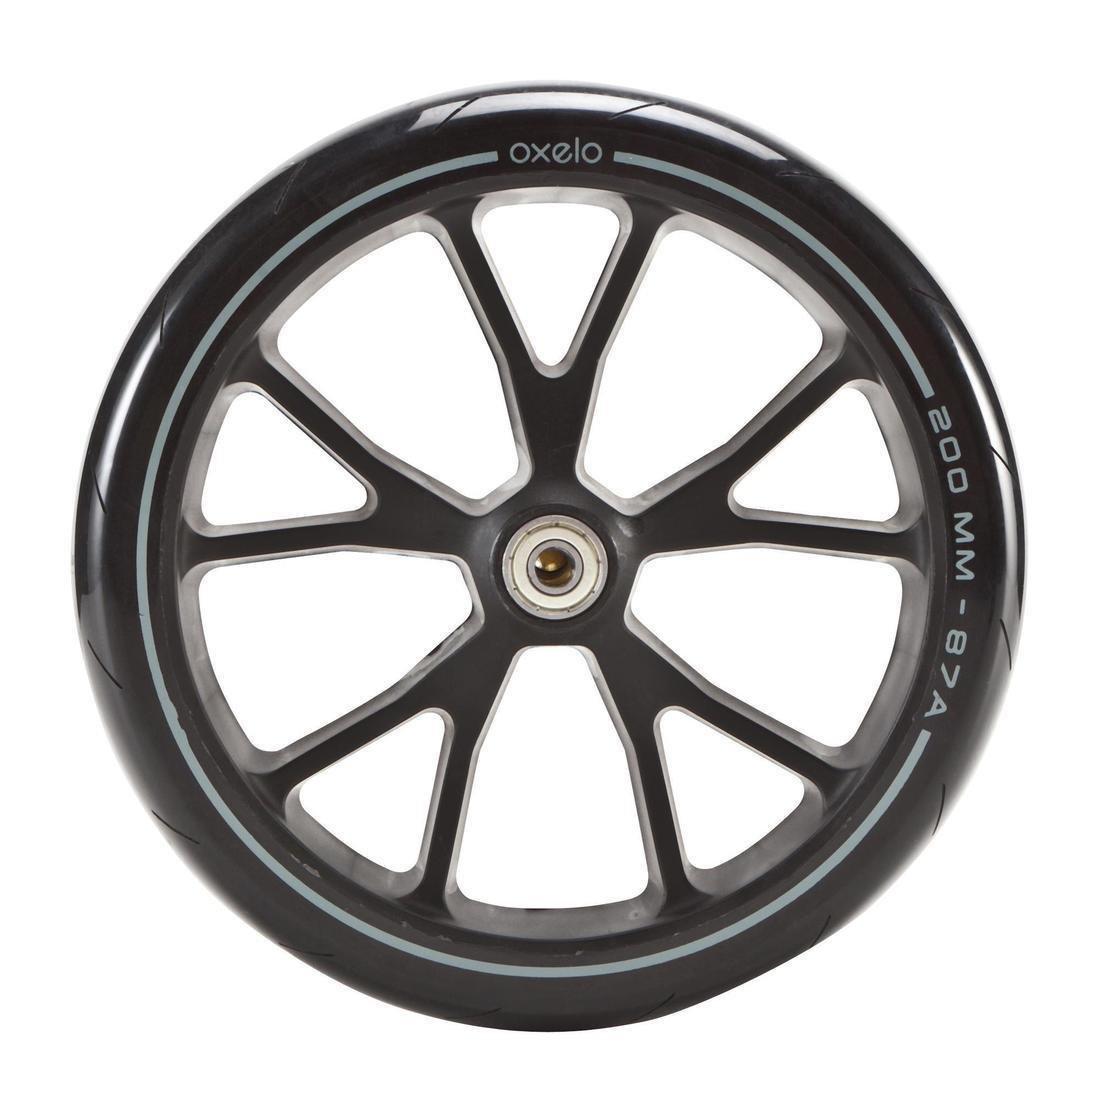 OXELO - Town Ef Adult Scooter Wheel, Black